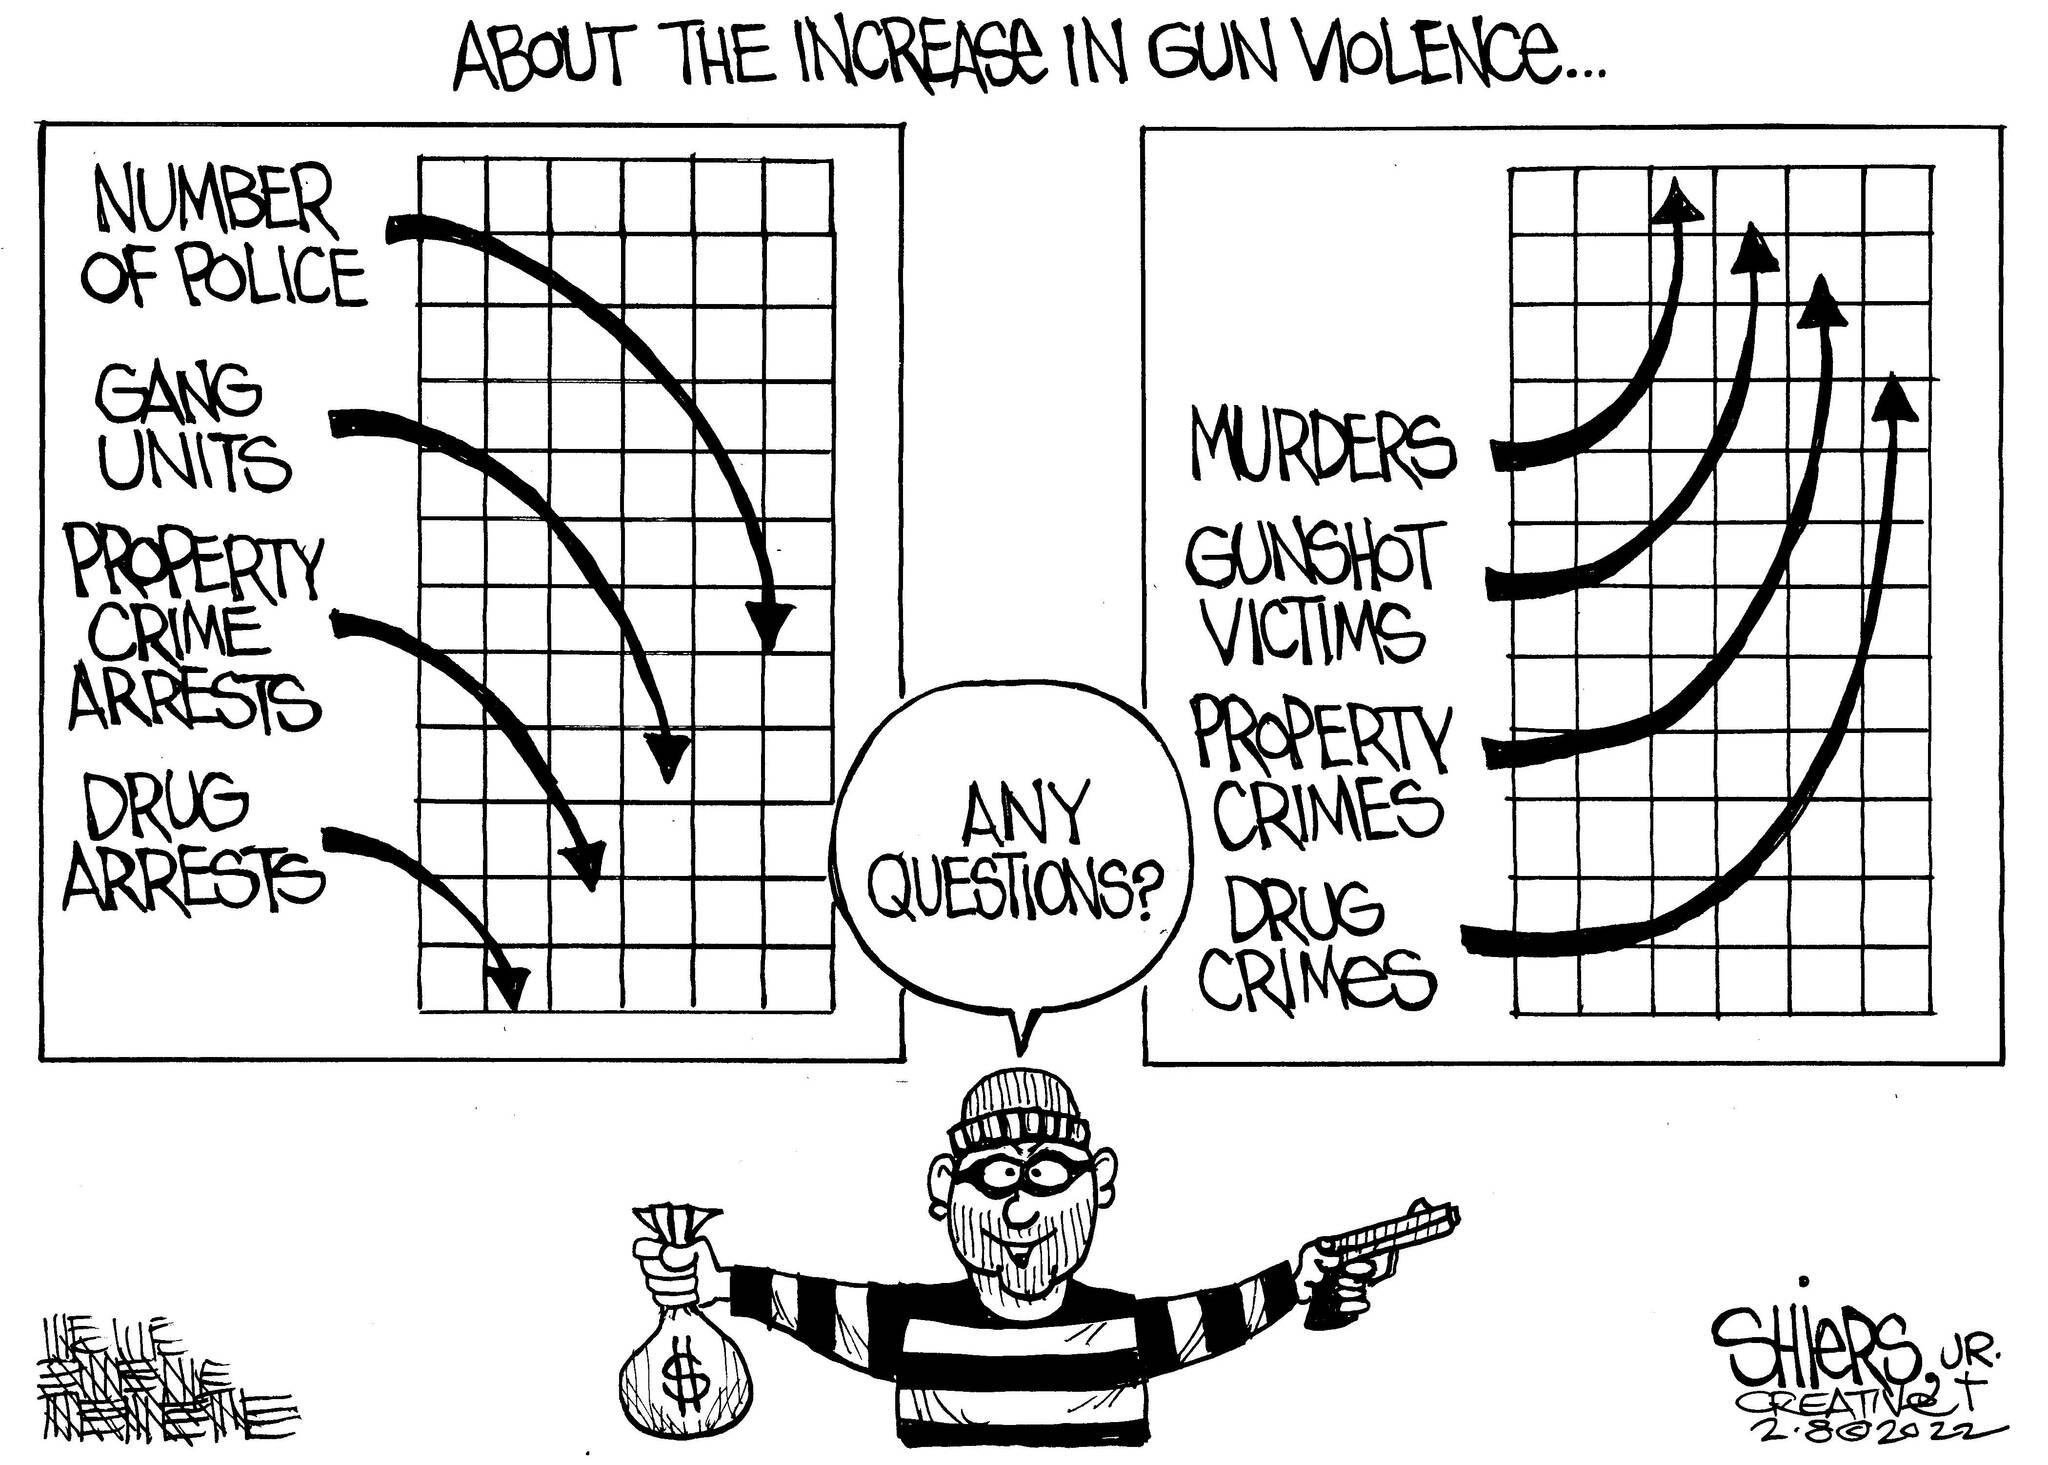 About the increase in gun violence | Shiers